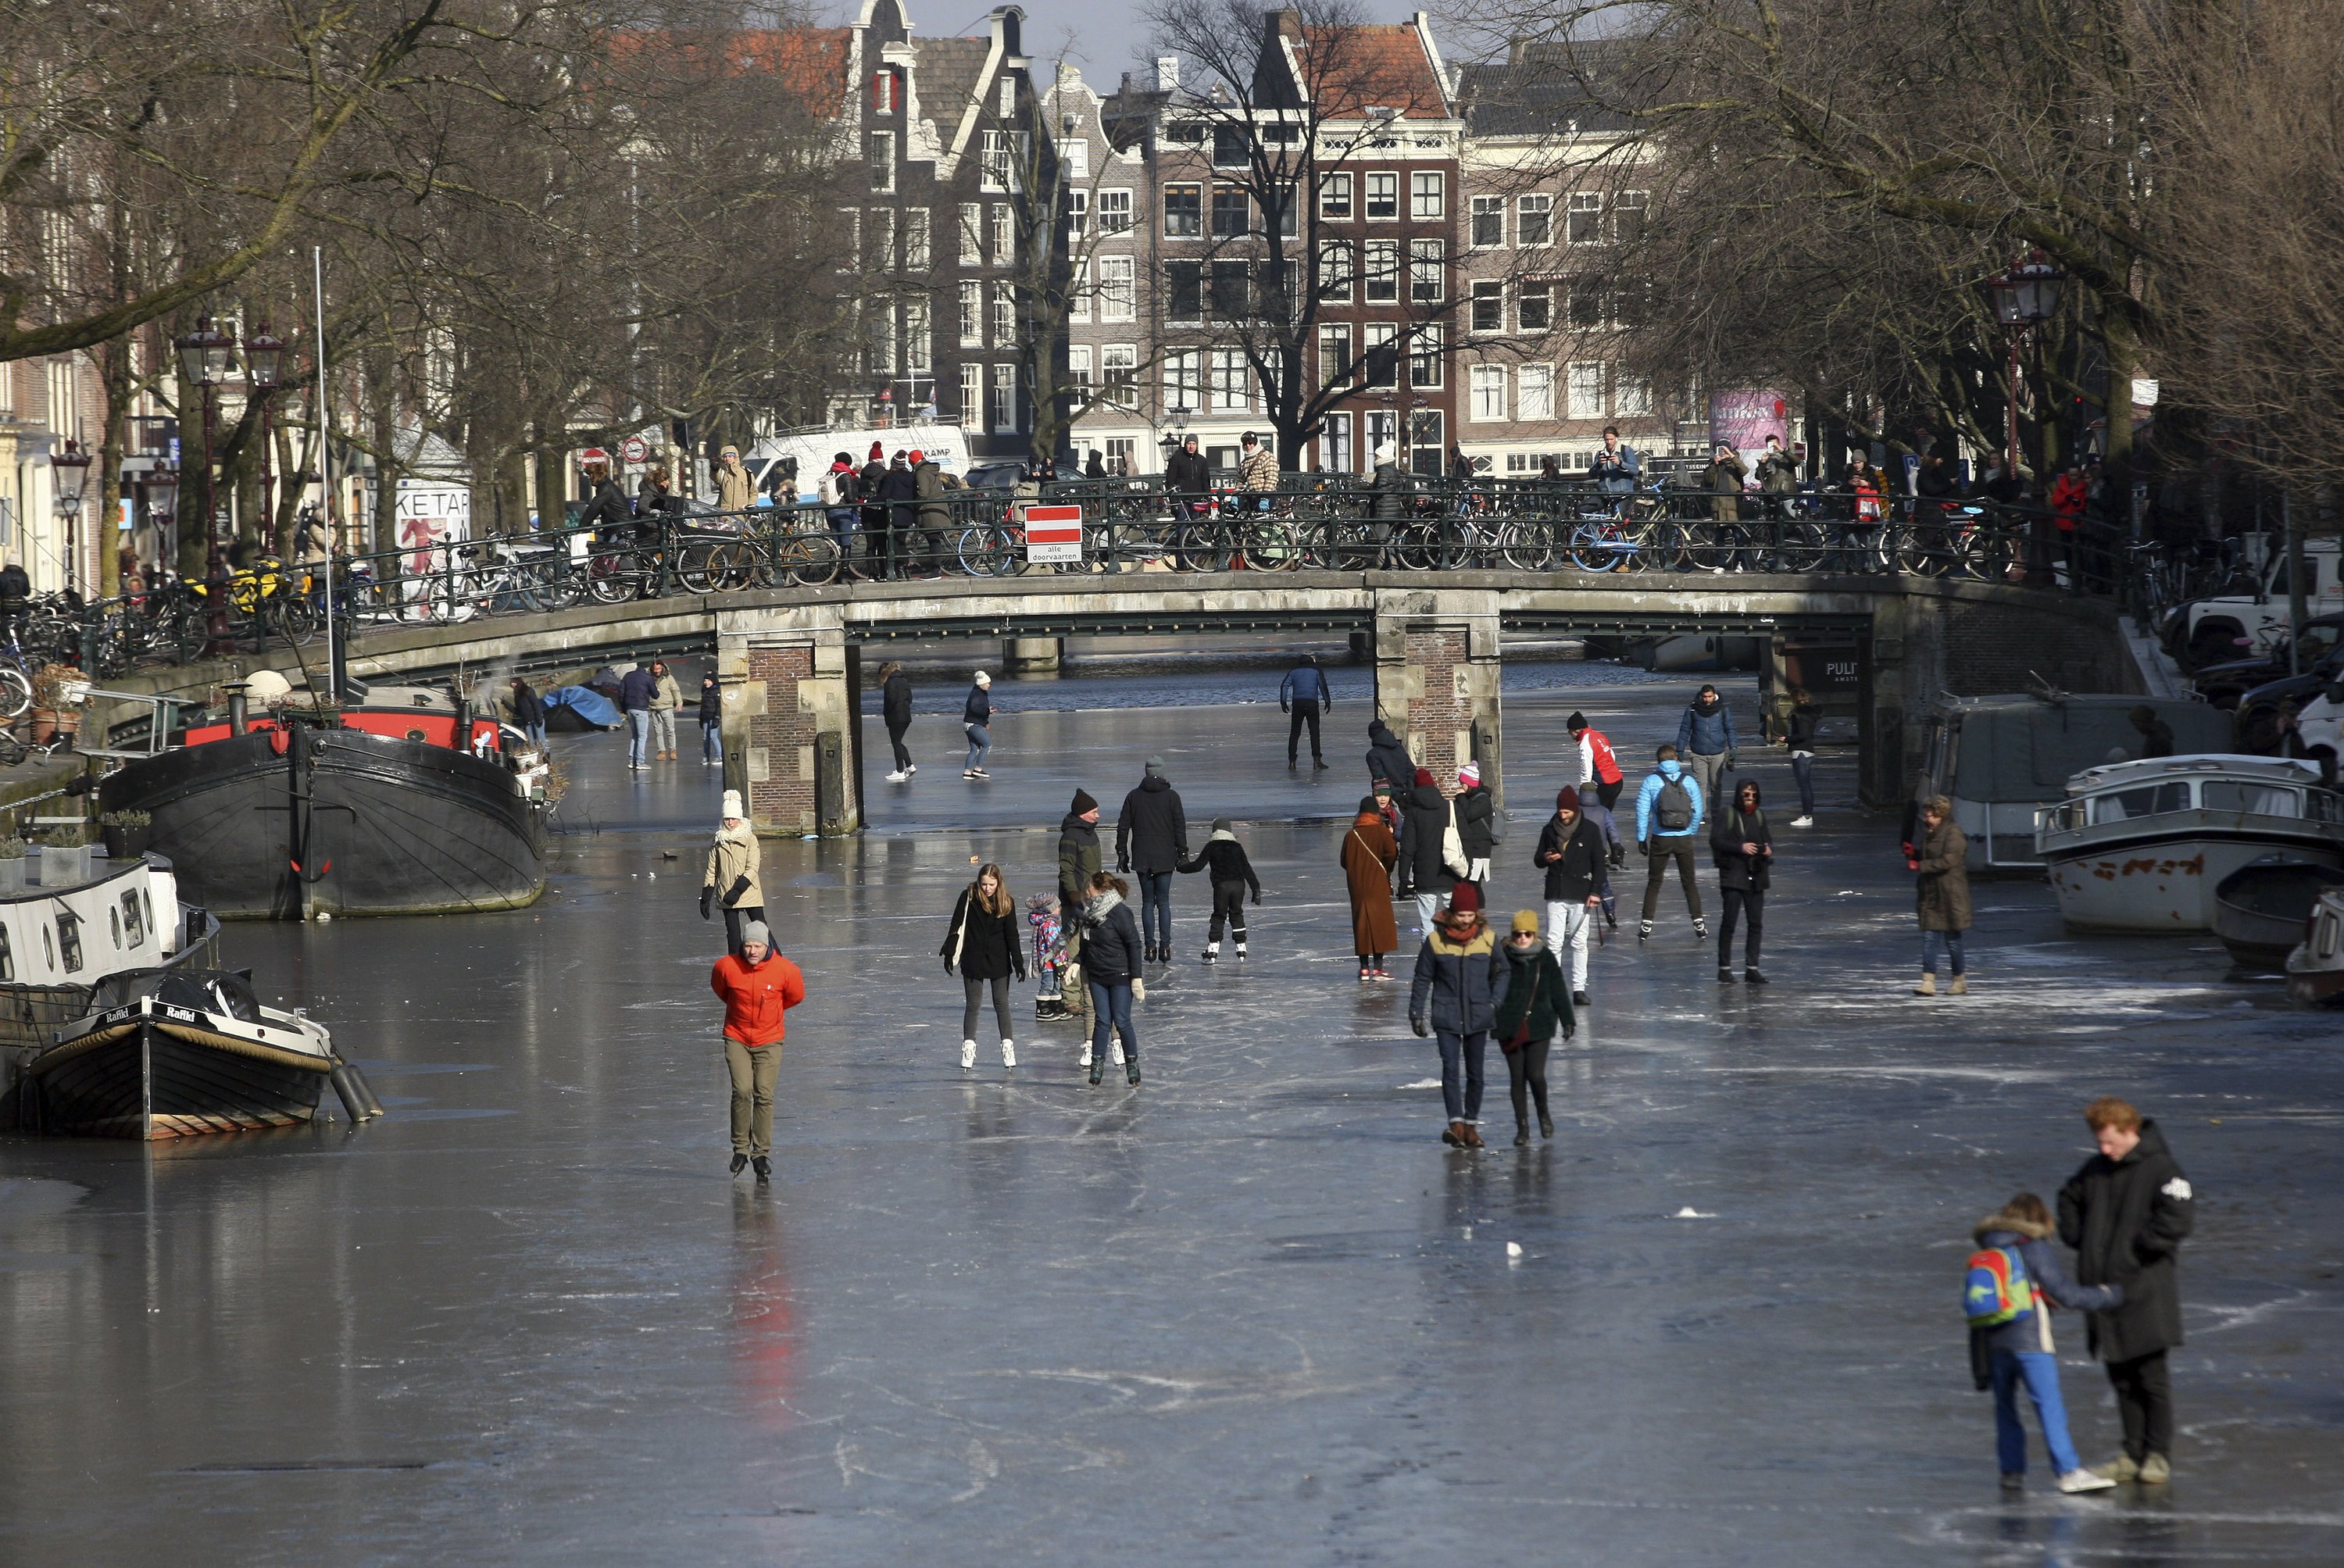 The Ideal Time to Explore Amsterdam